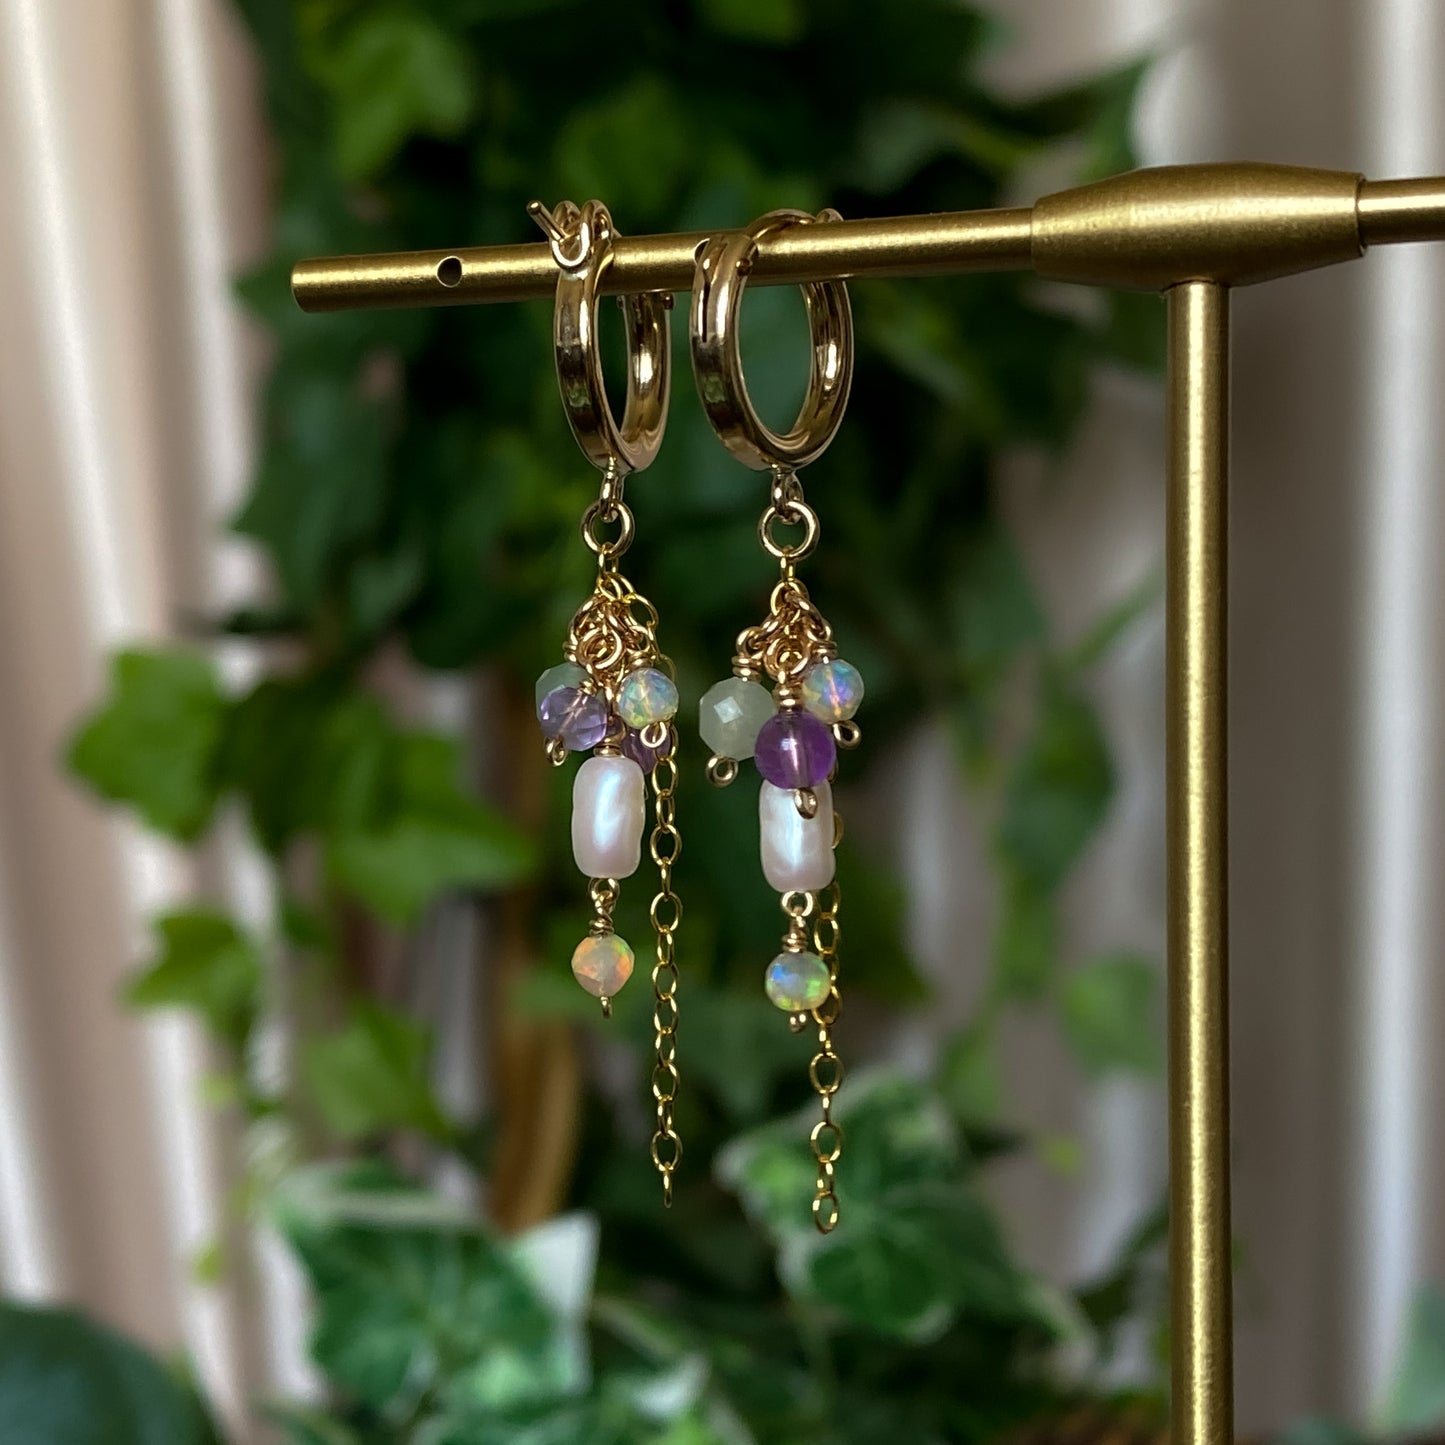 Summer Garden ~ Amethyst, Aventurine, Ethiopian Opal, Vintage Faux Pearl and 14k Gold Filled Mini Layered Dangles